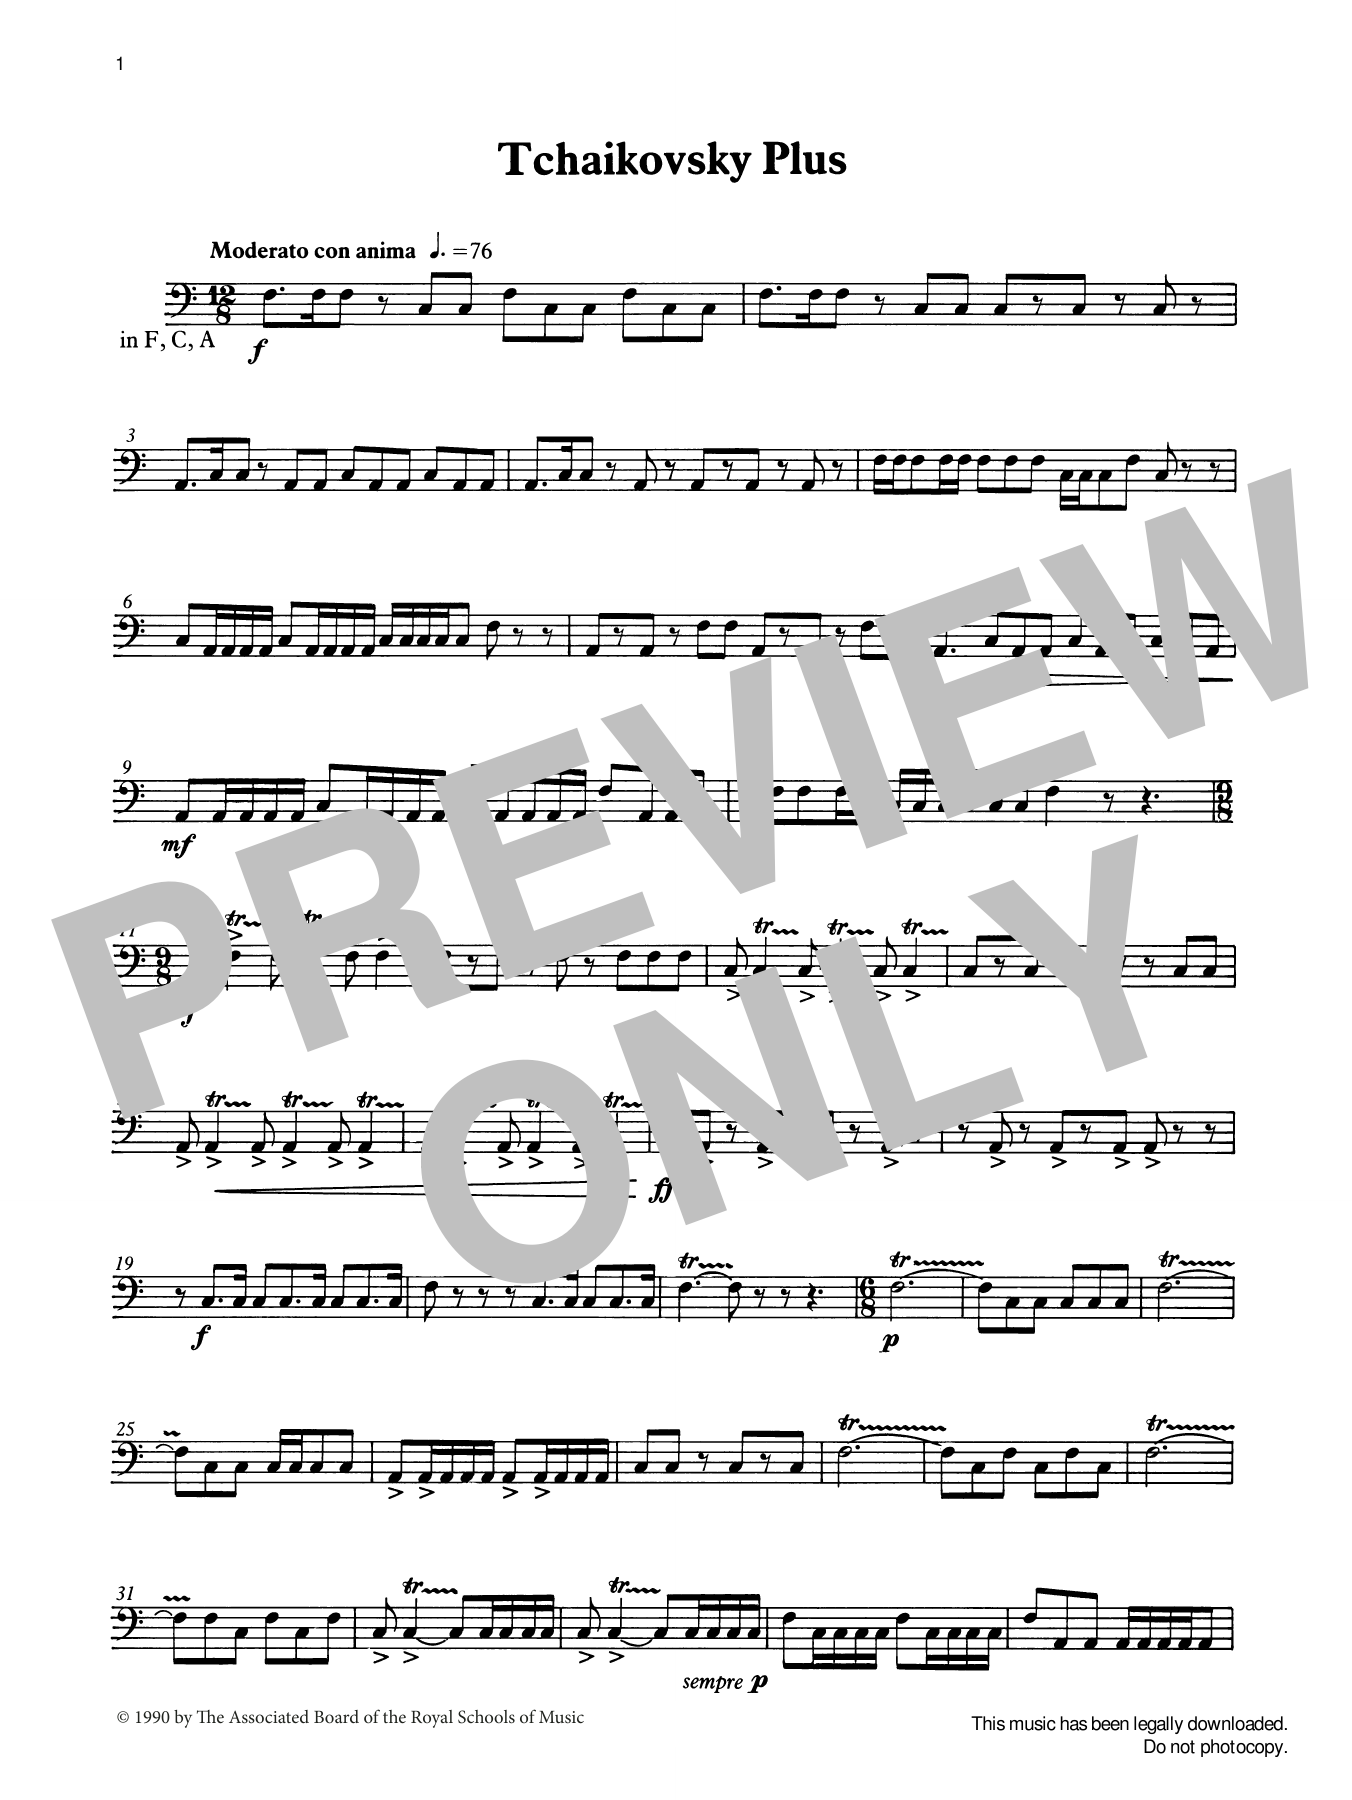 Download Ian Wright Tchaikovsky Plus from Graded Music for Sheet Music